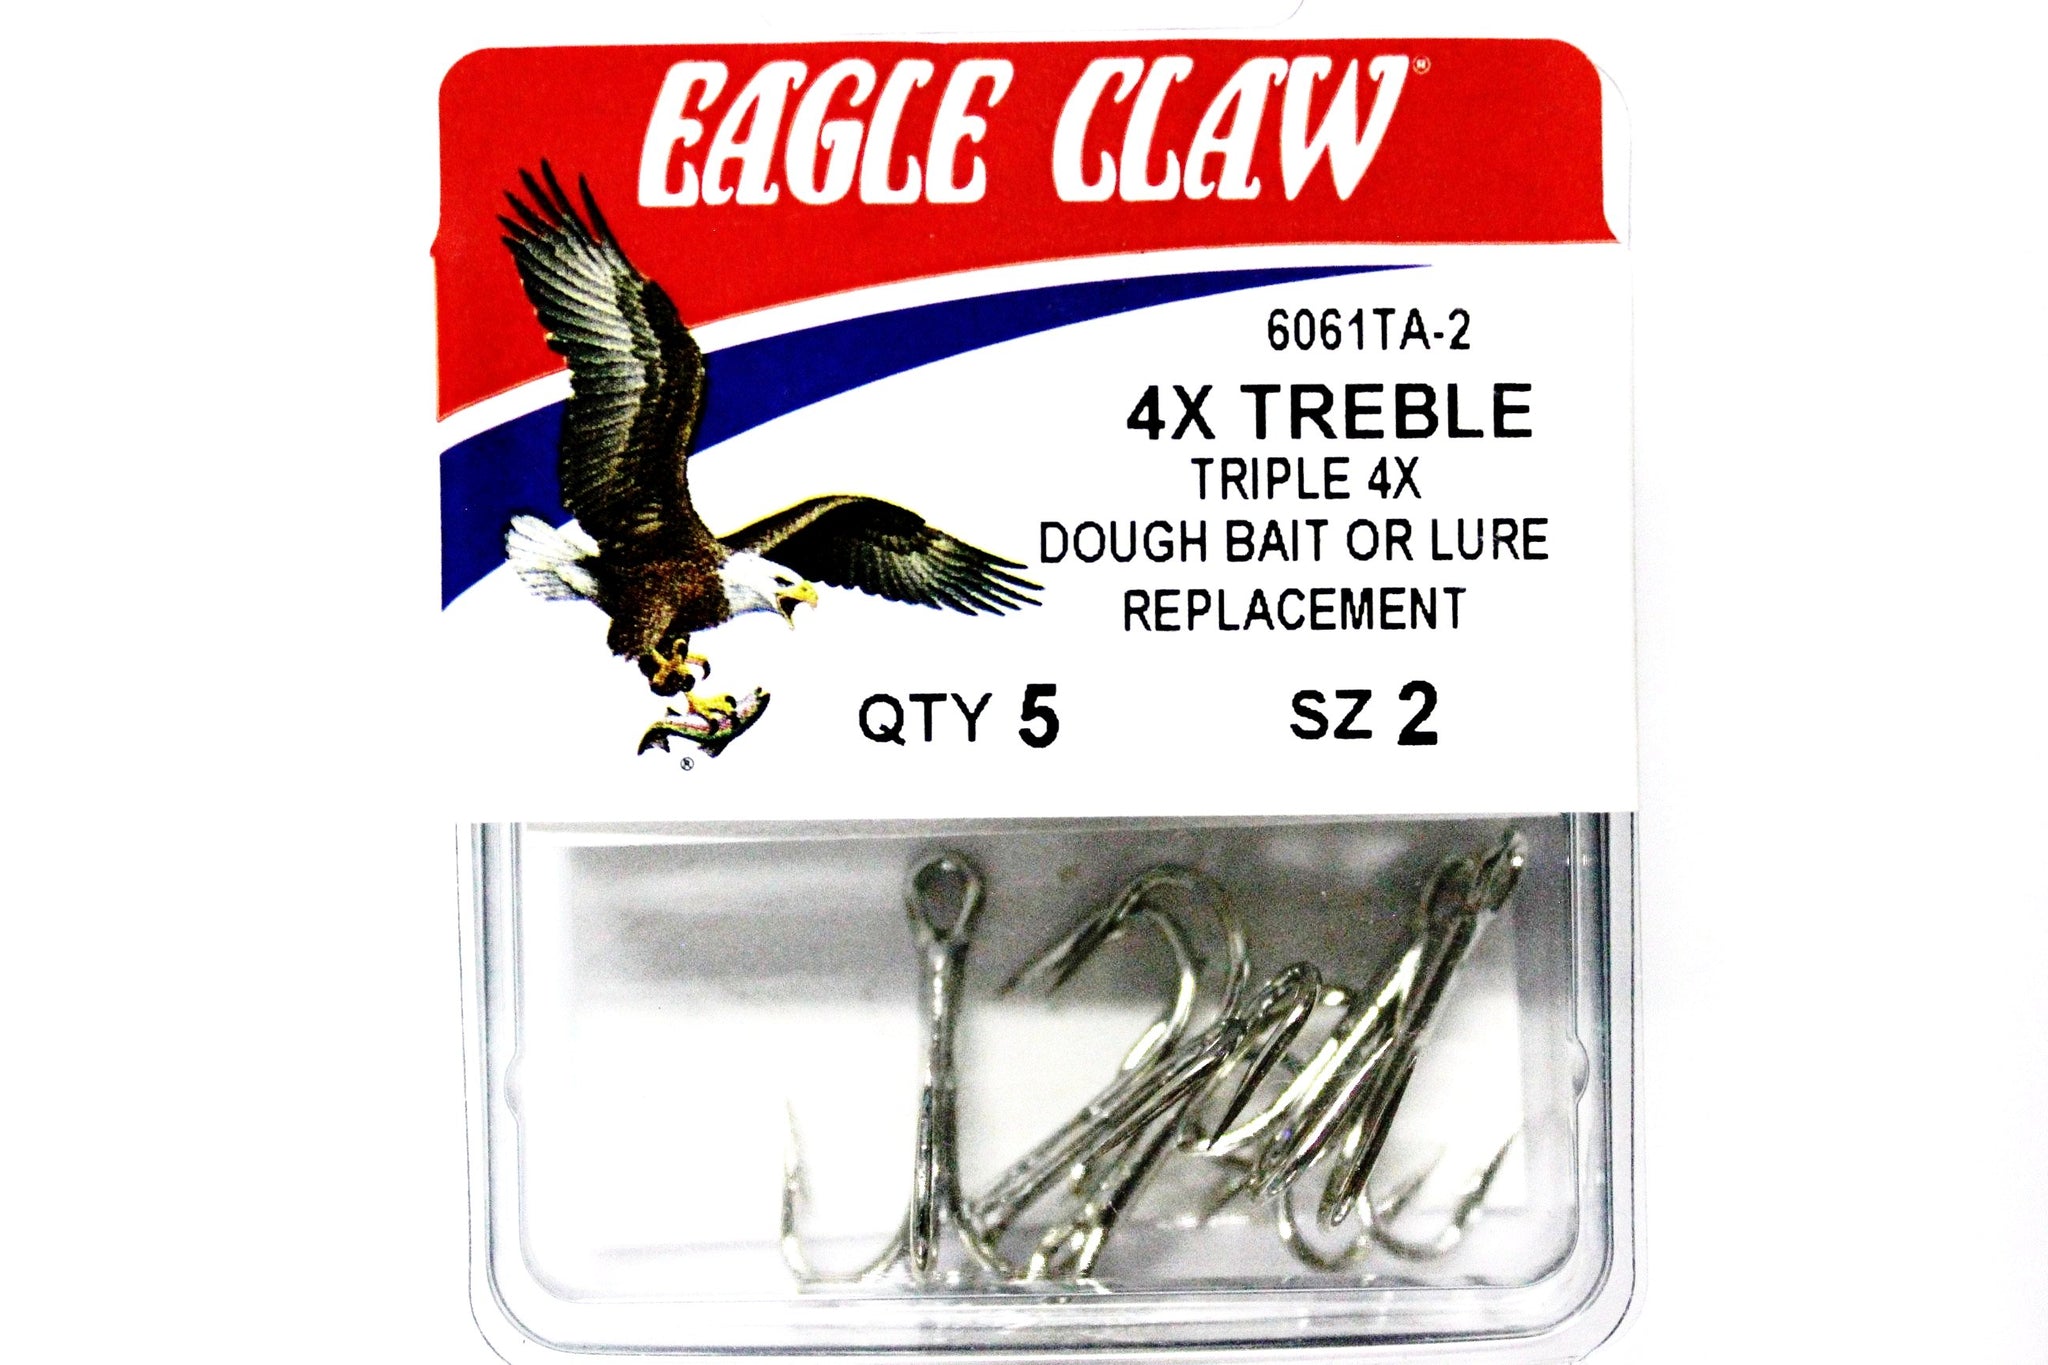 Eagle Claw 4X Treble Hook – Ultimate Fishing and Outdoors